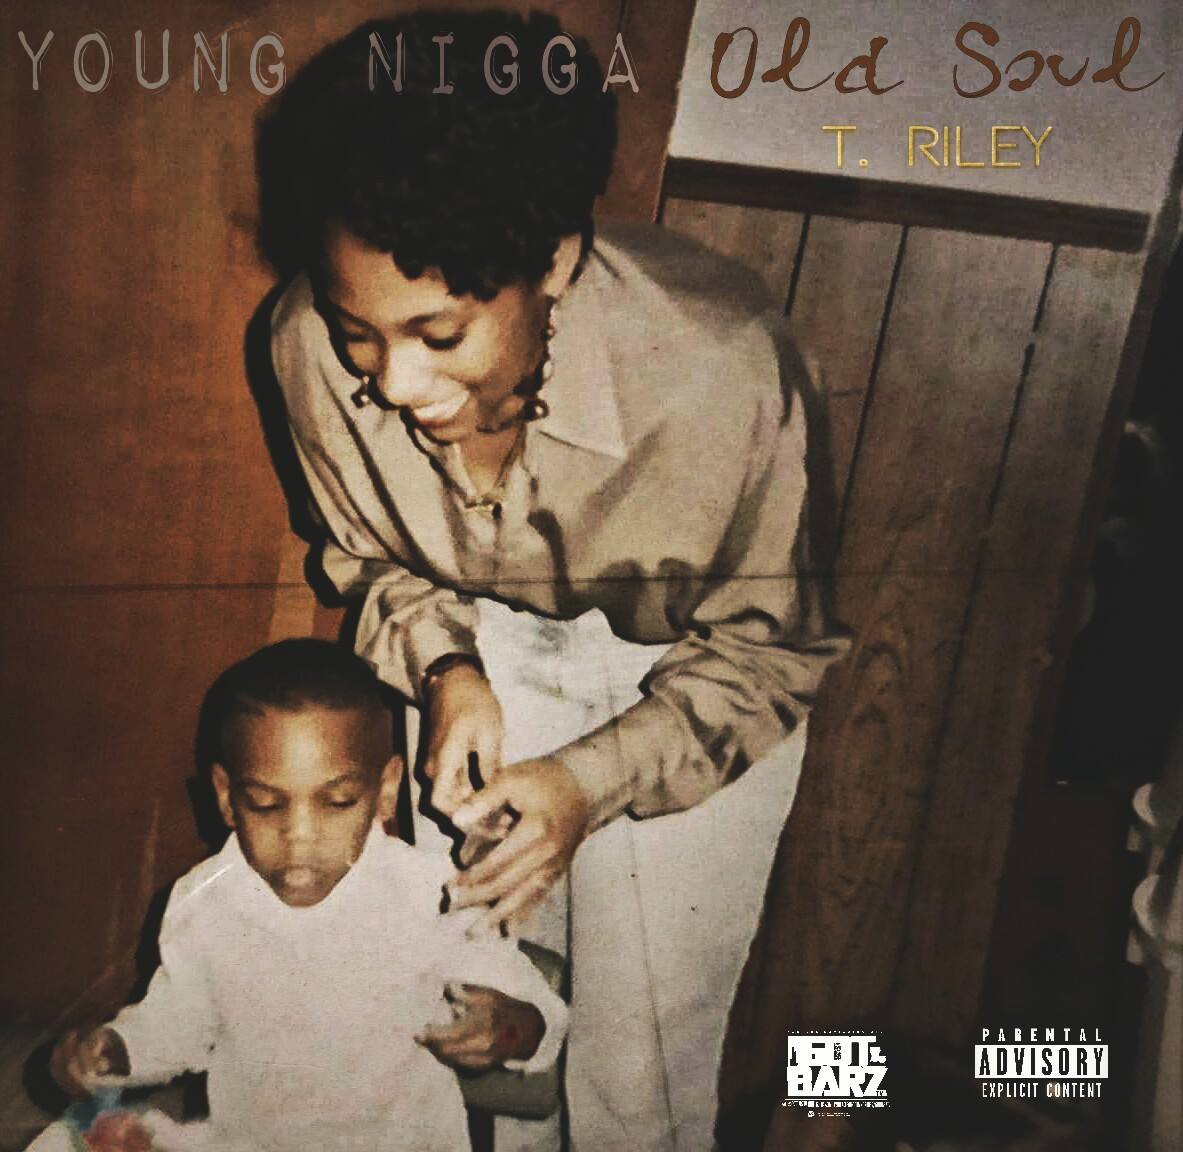 New Album By T. Riley - "Young Nigga Old Soul"